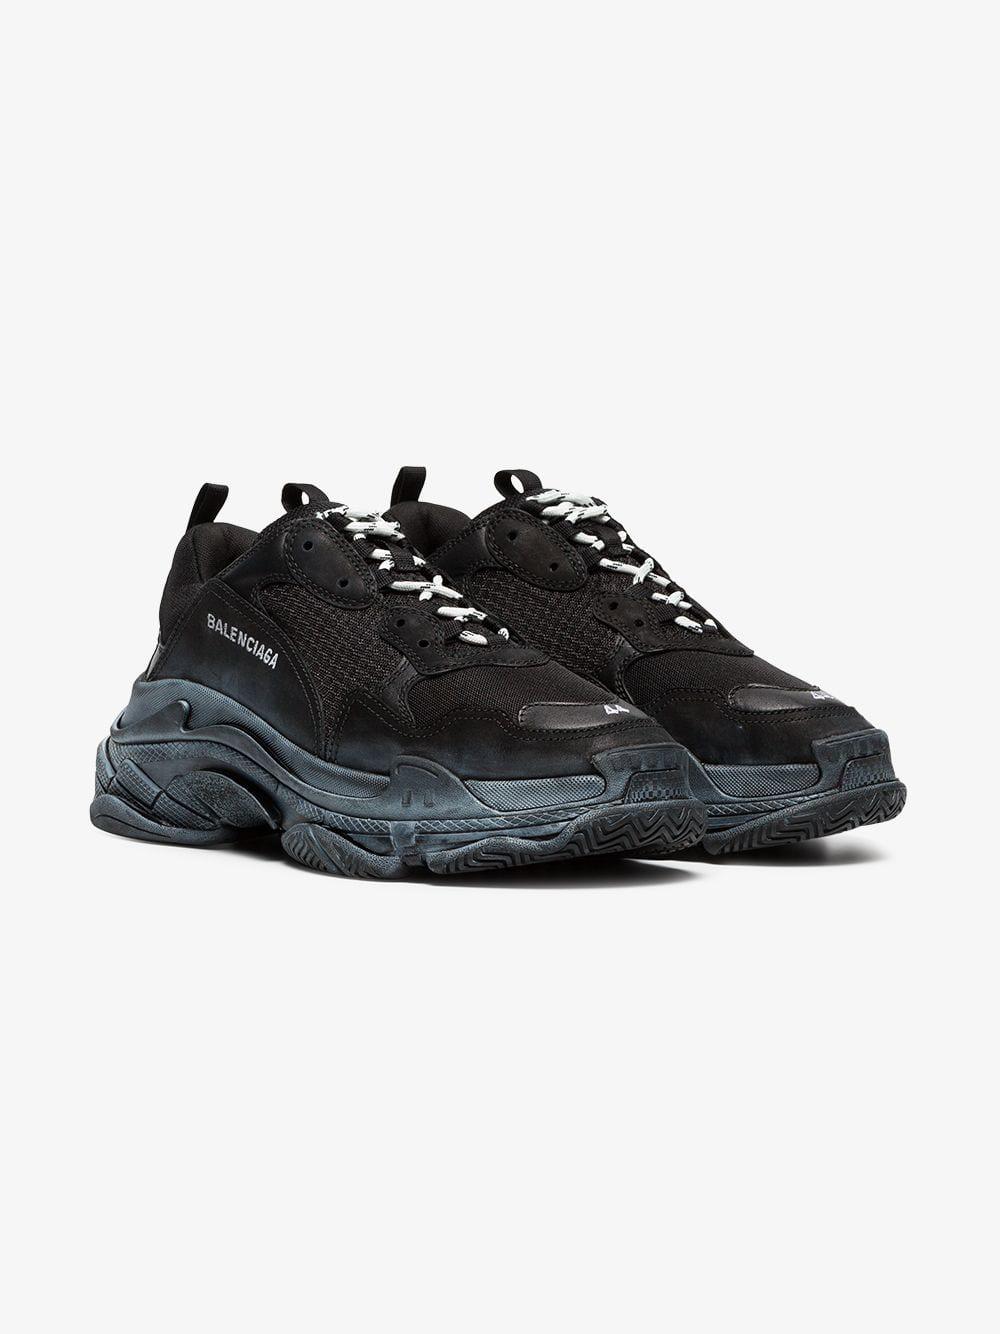 Balenciaga Black Triple S Distressed Leather Sneakers for Men - Lyst